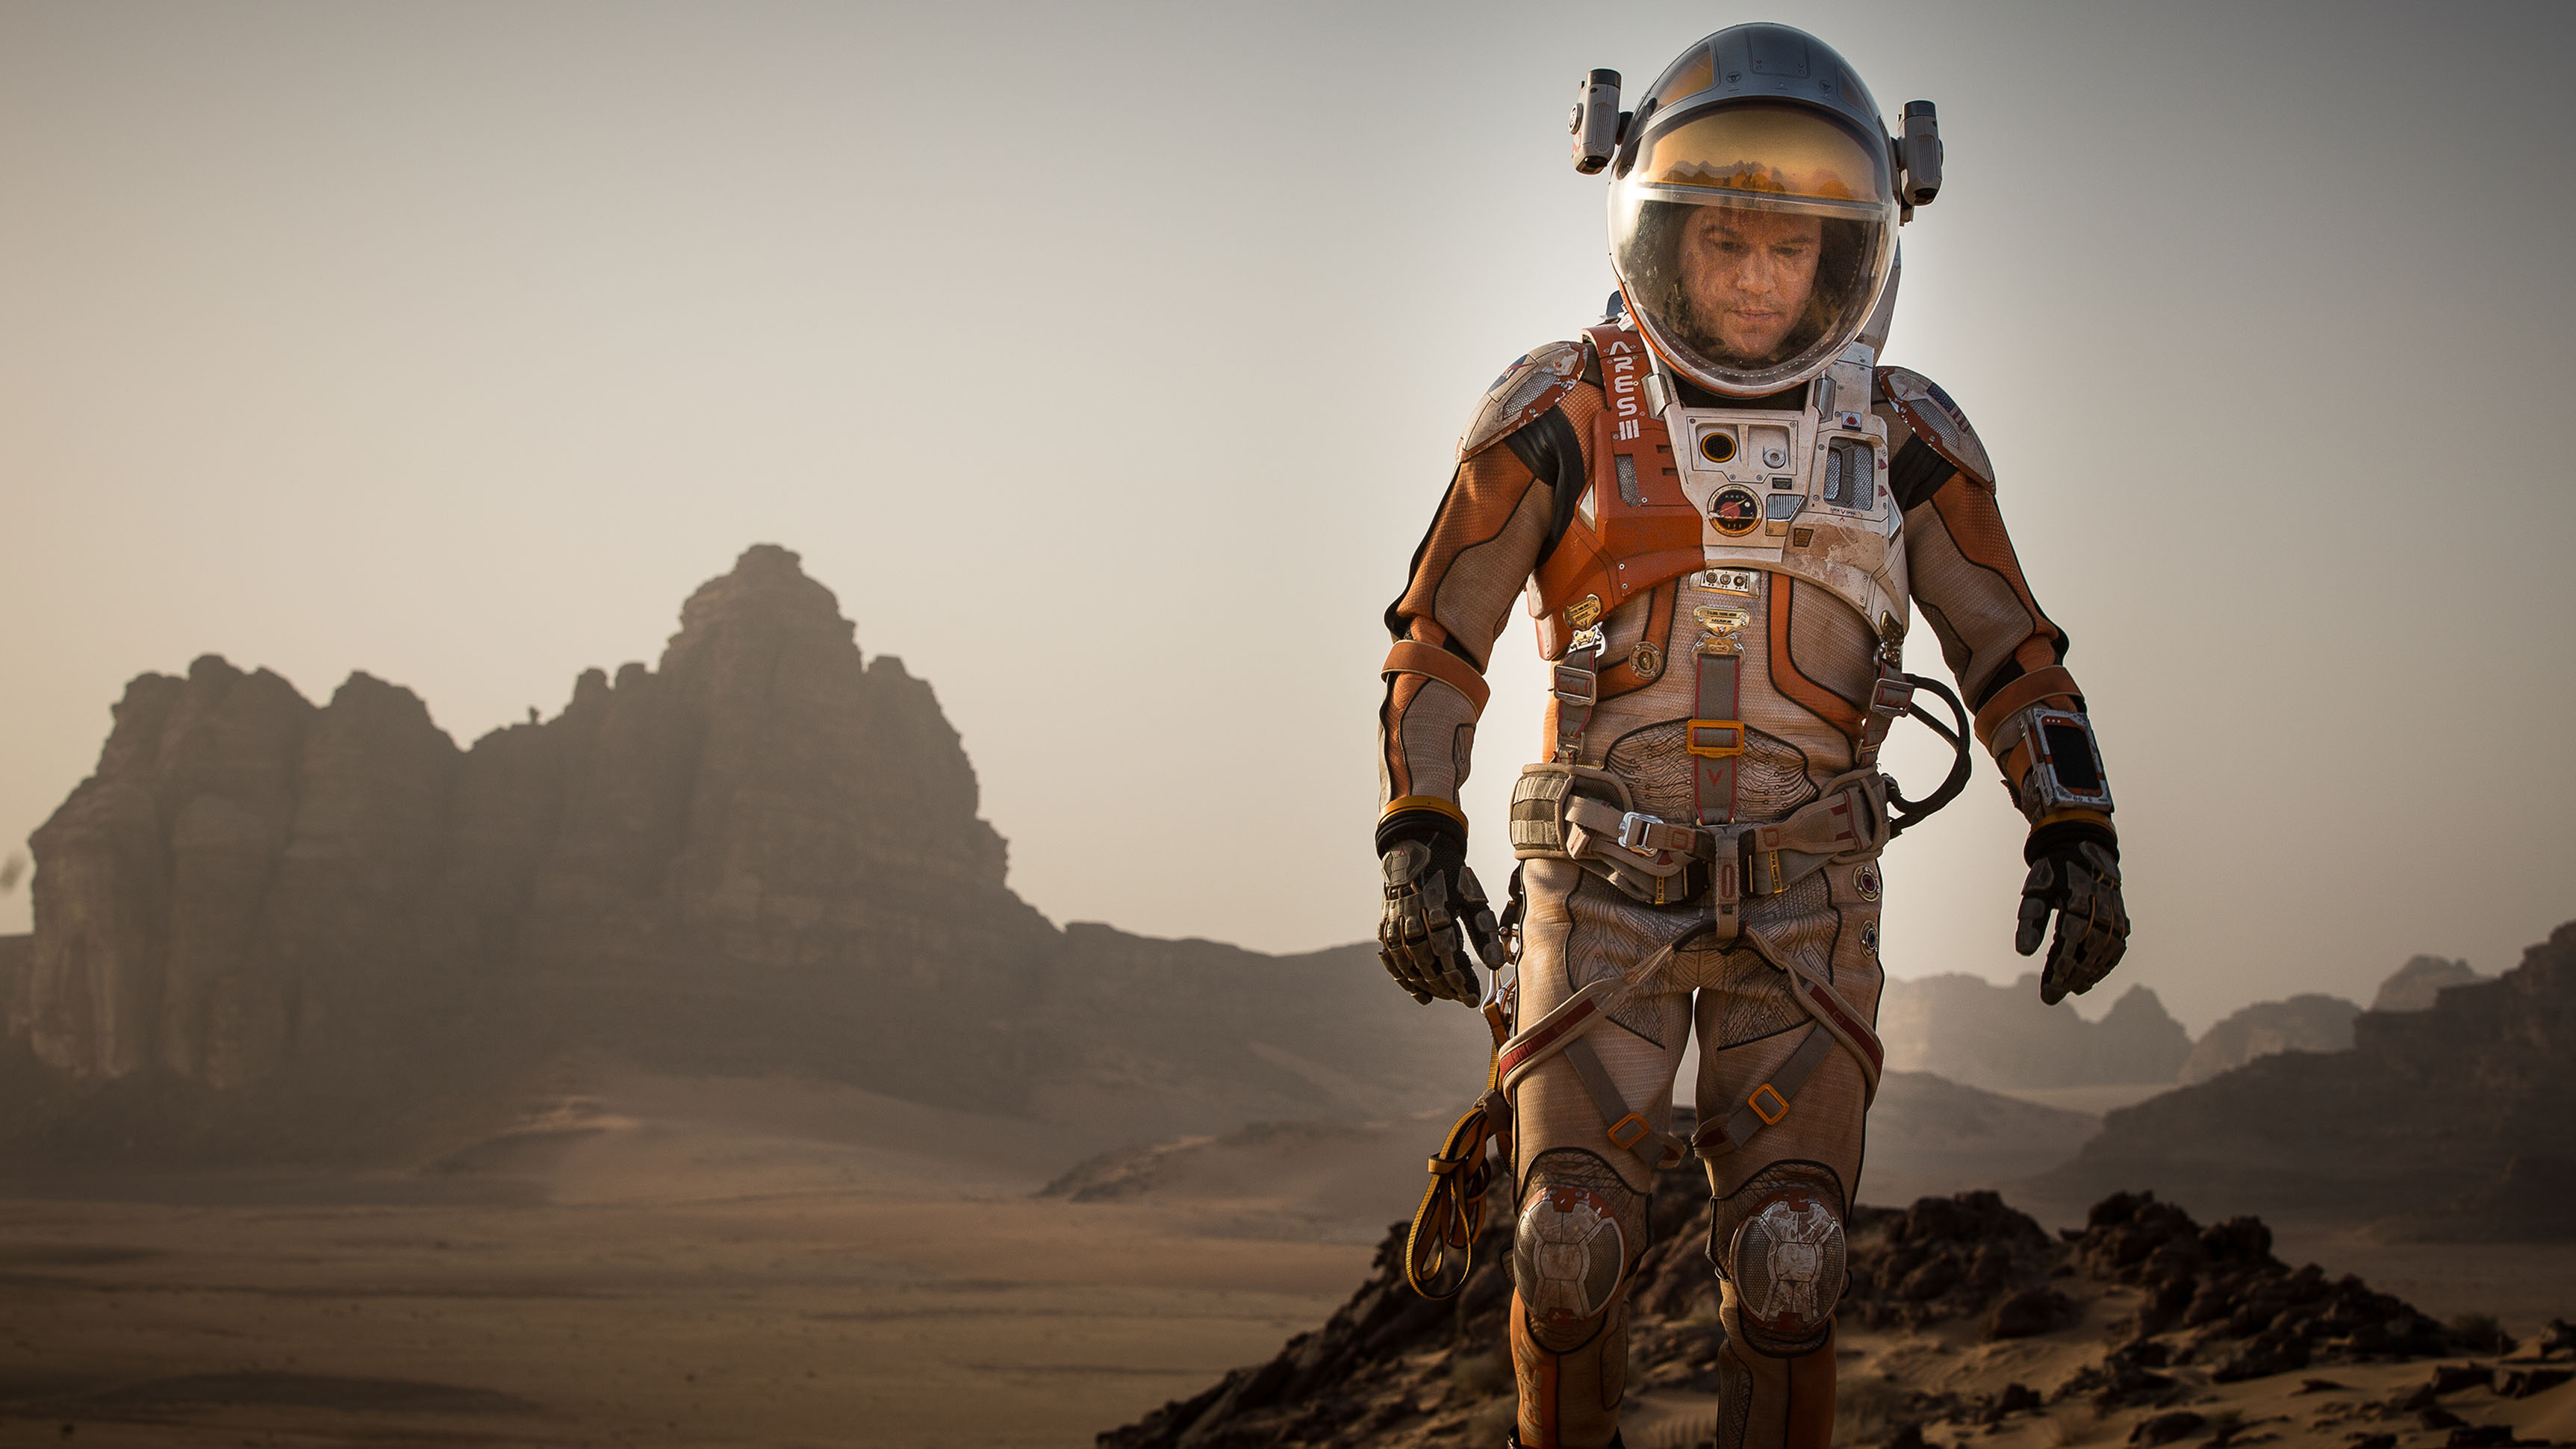 Art of the Cut: The Martian with Cheryl Potter 2